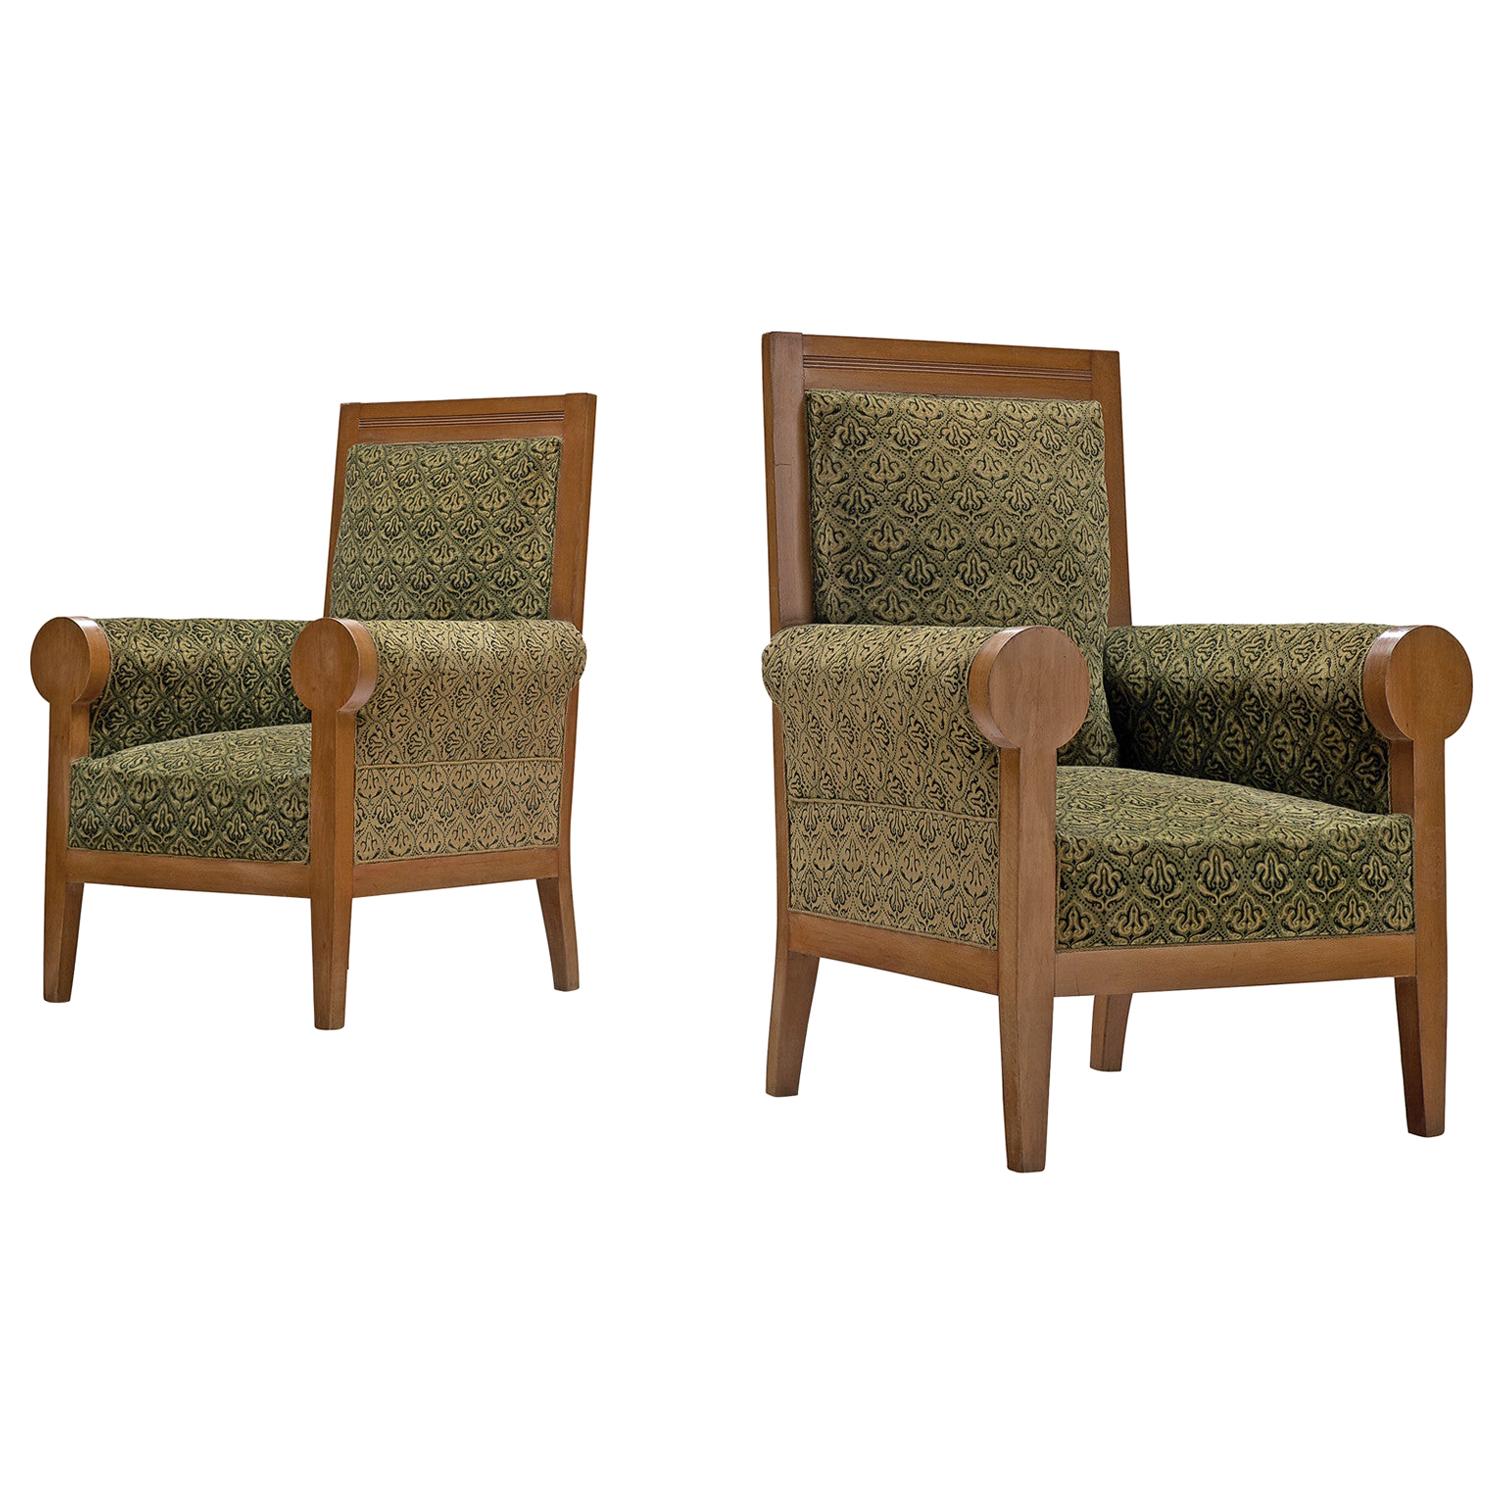 Pair of Italian High Back Armchairs in Green Fabric Upholstery